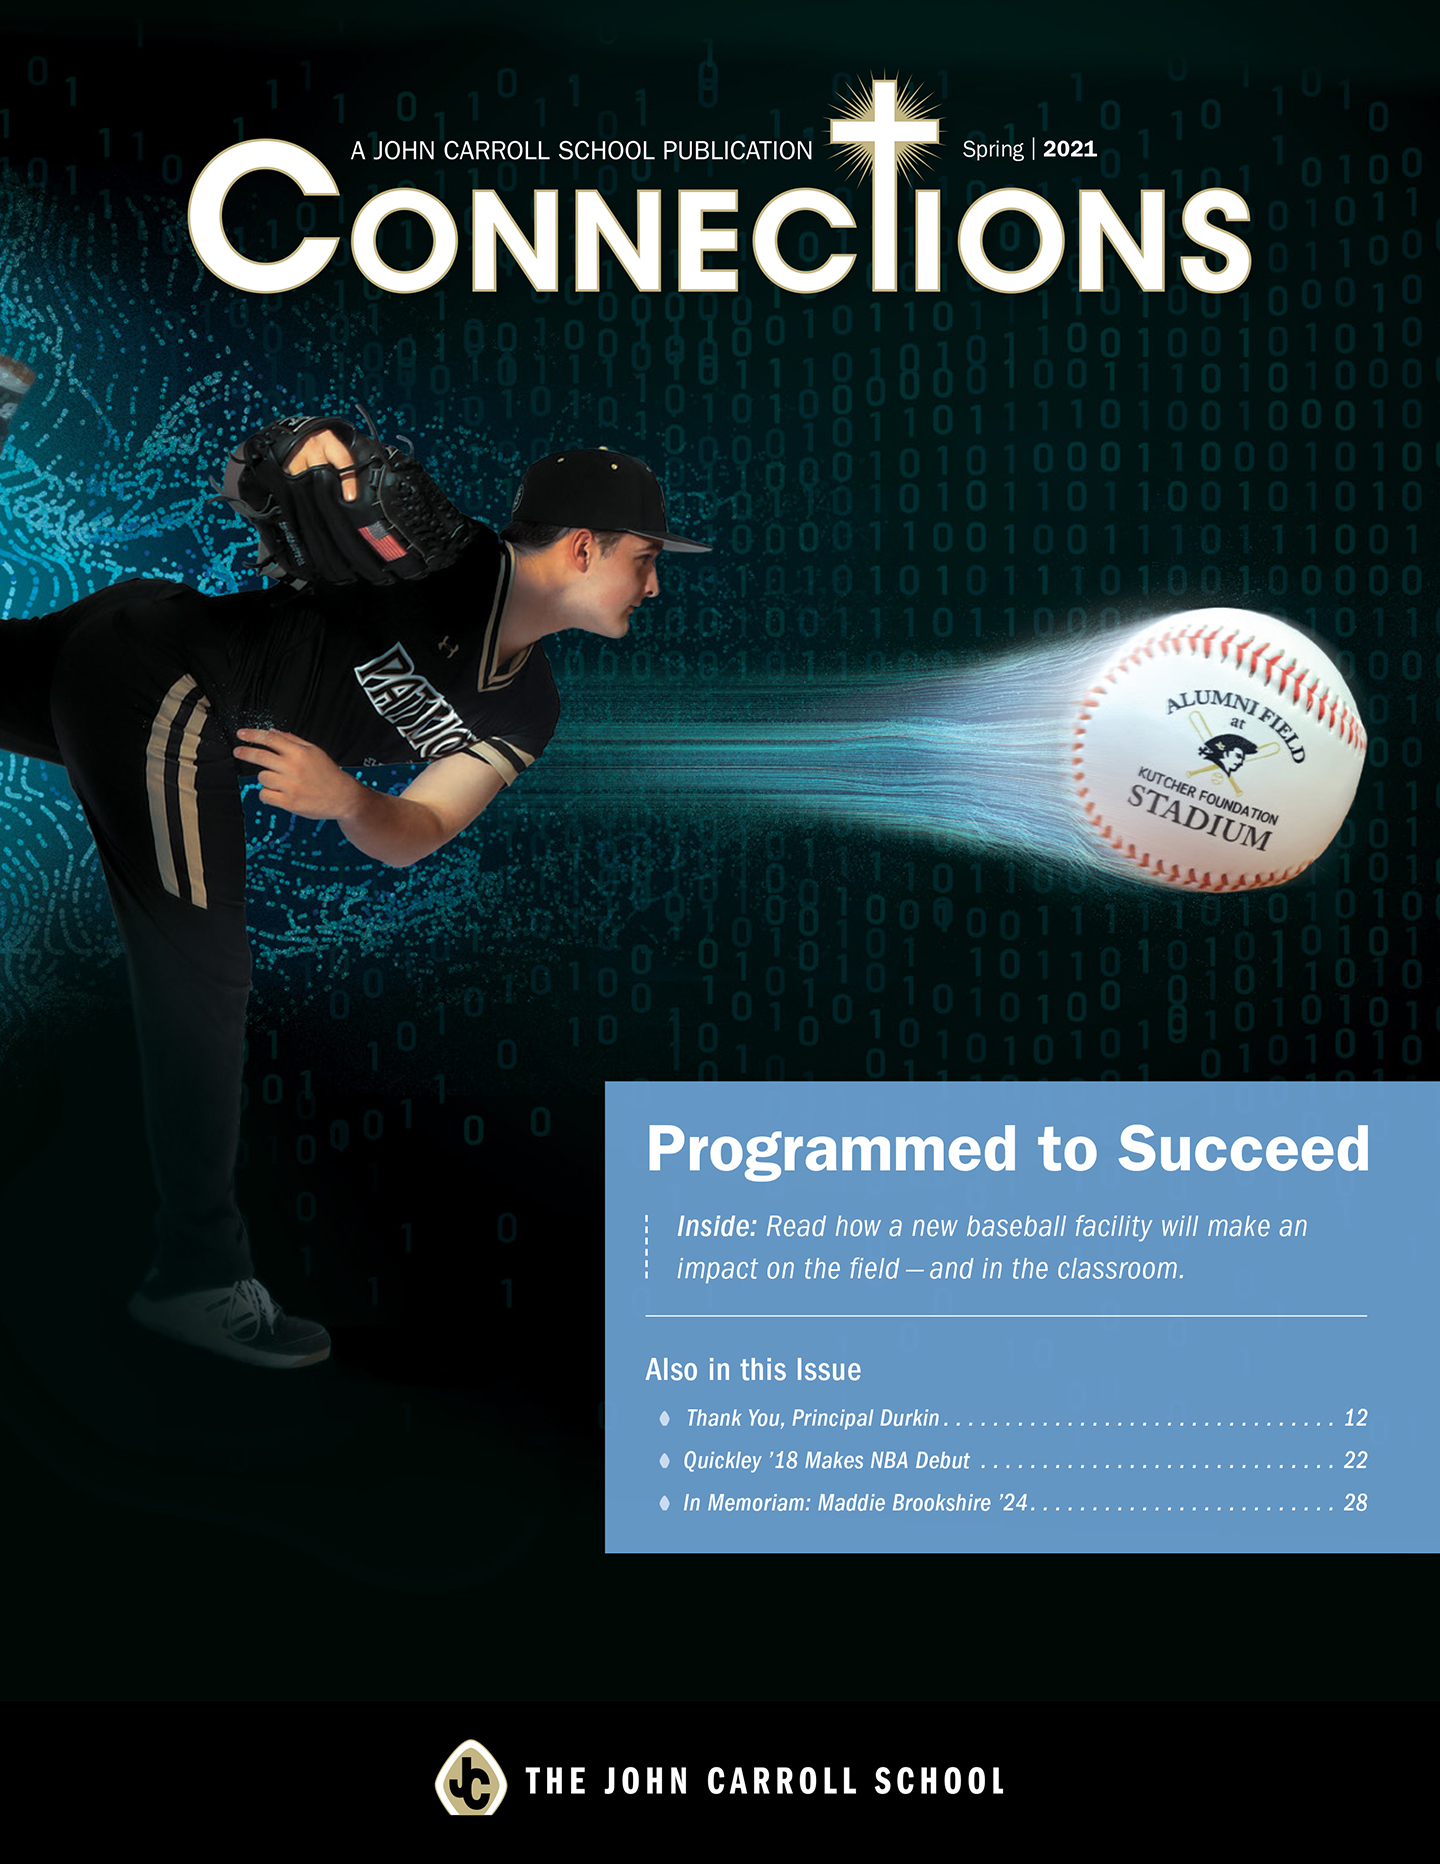 Spring 21 Connections cover